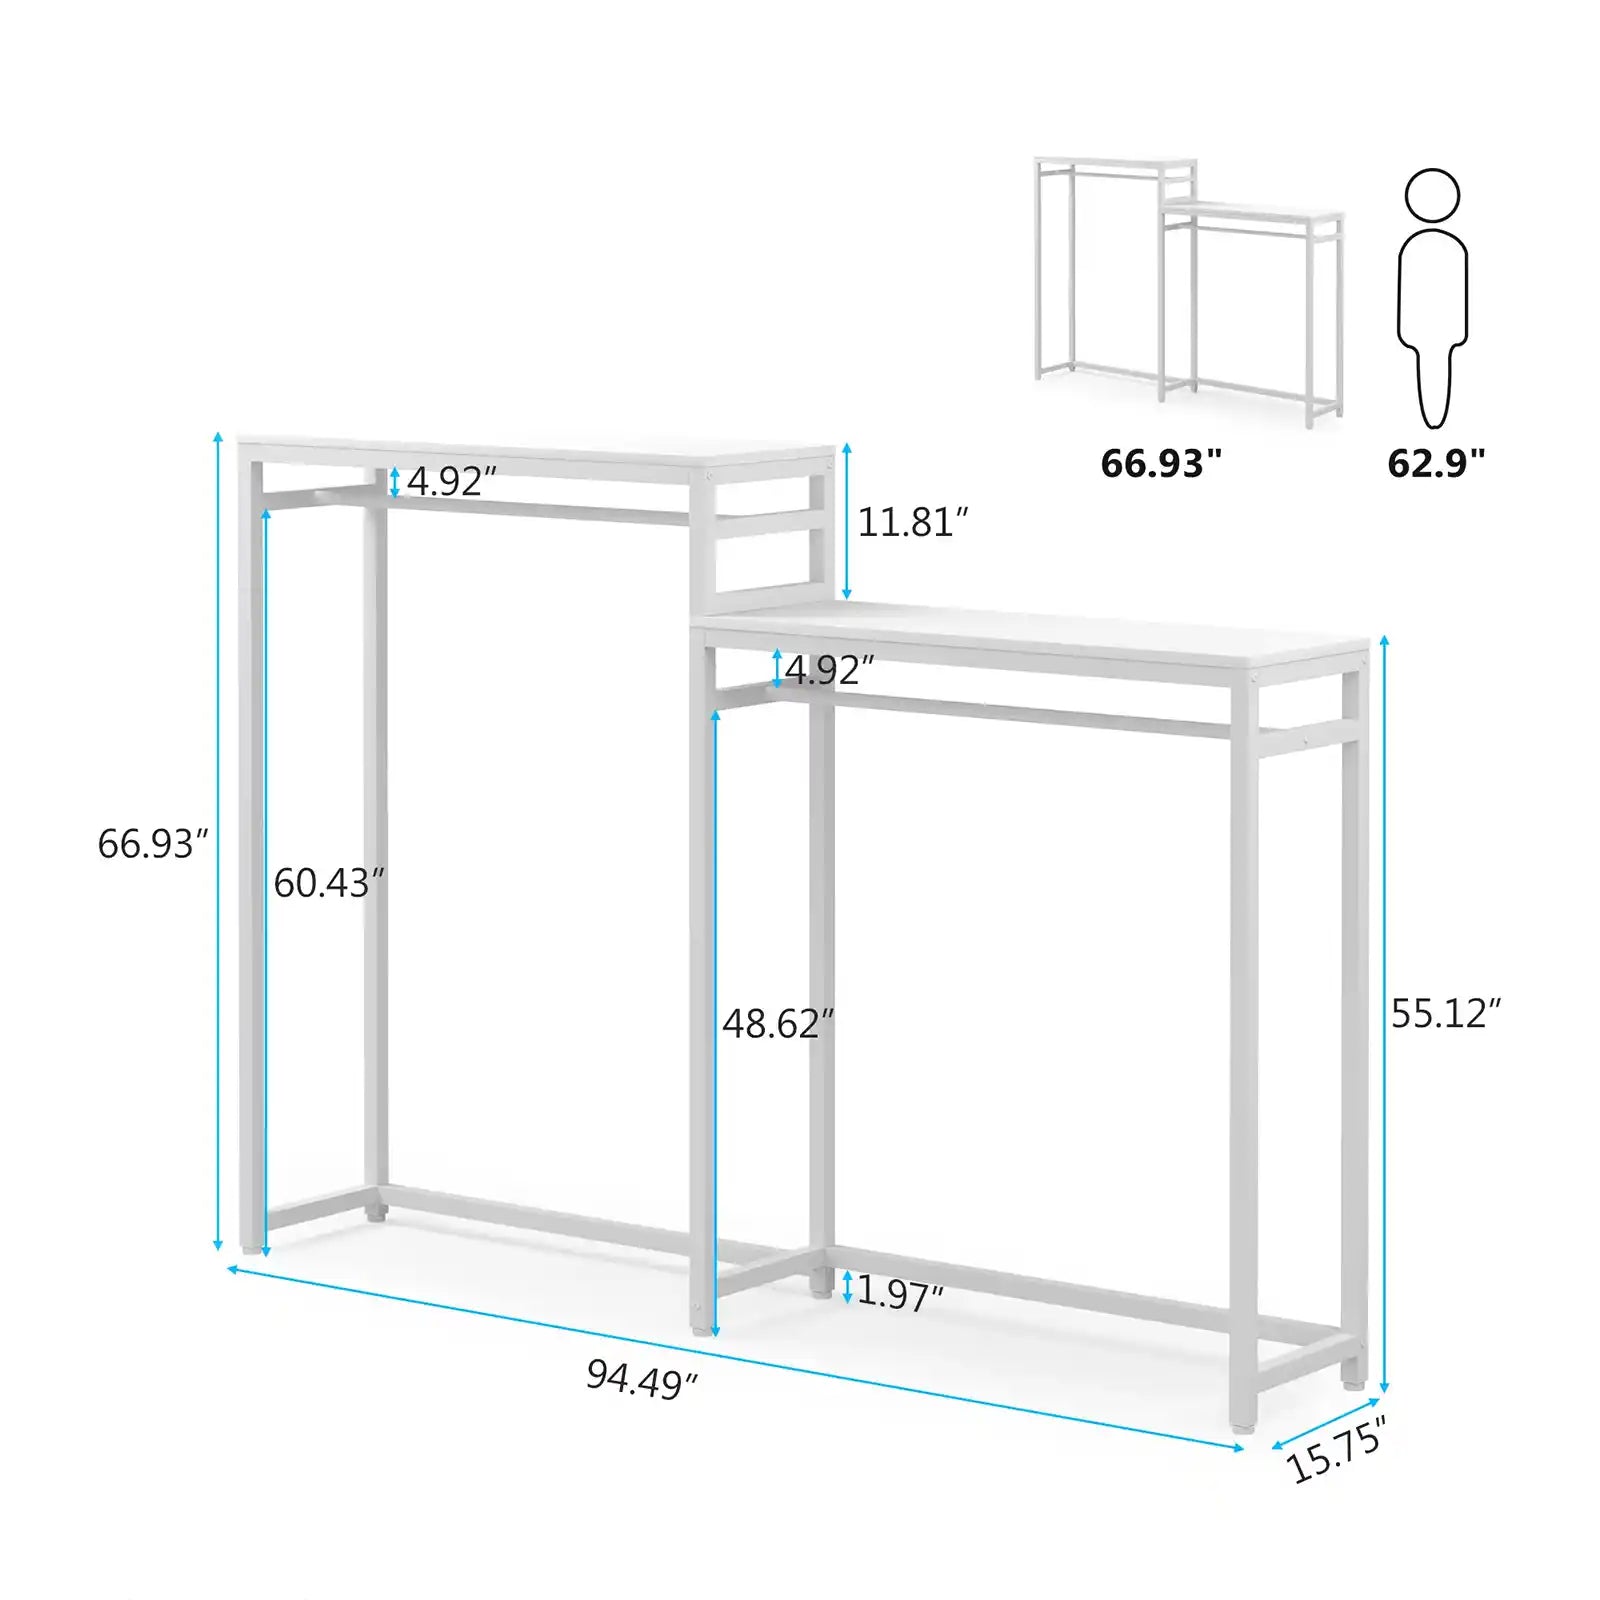 Convertible Storage Shelves and Double Hanging Rod